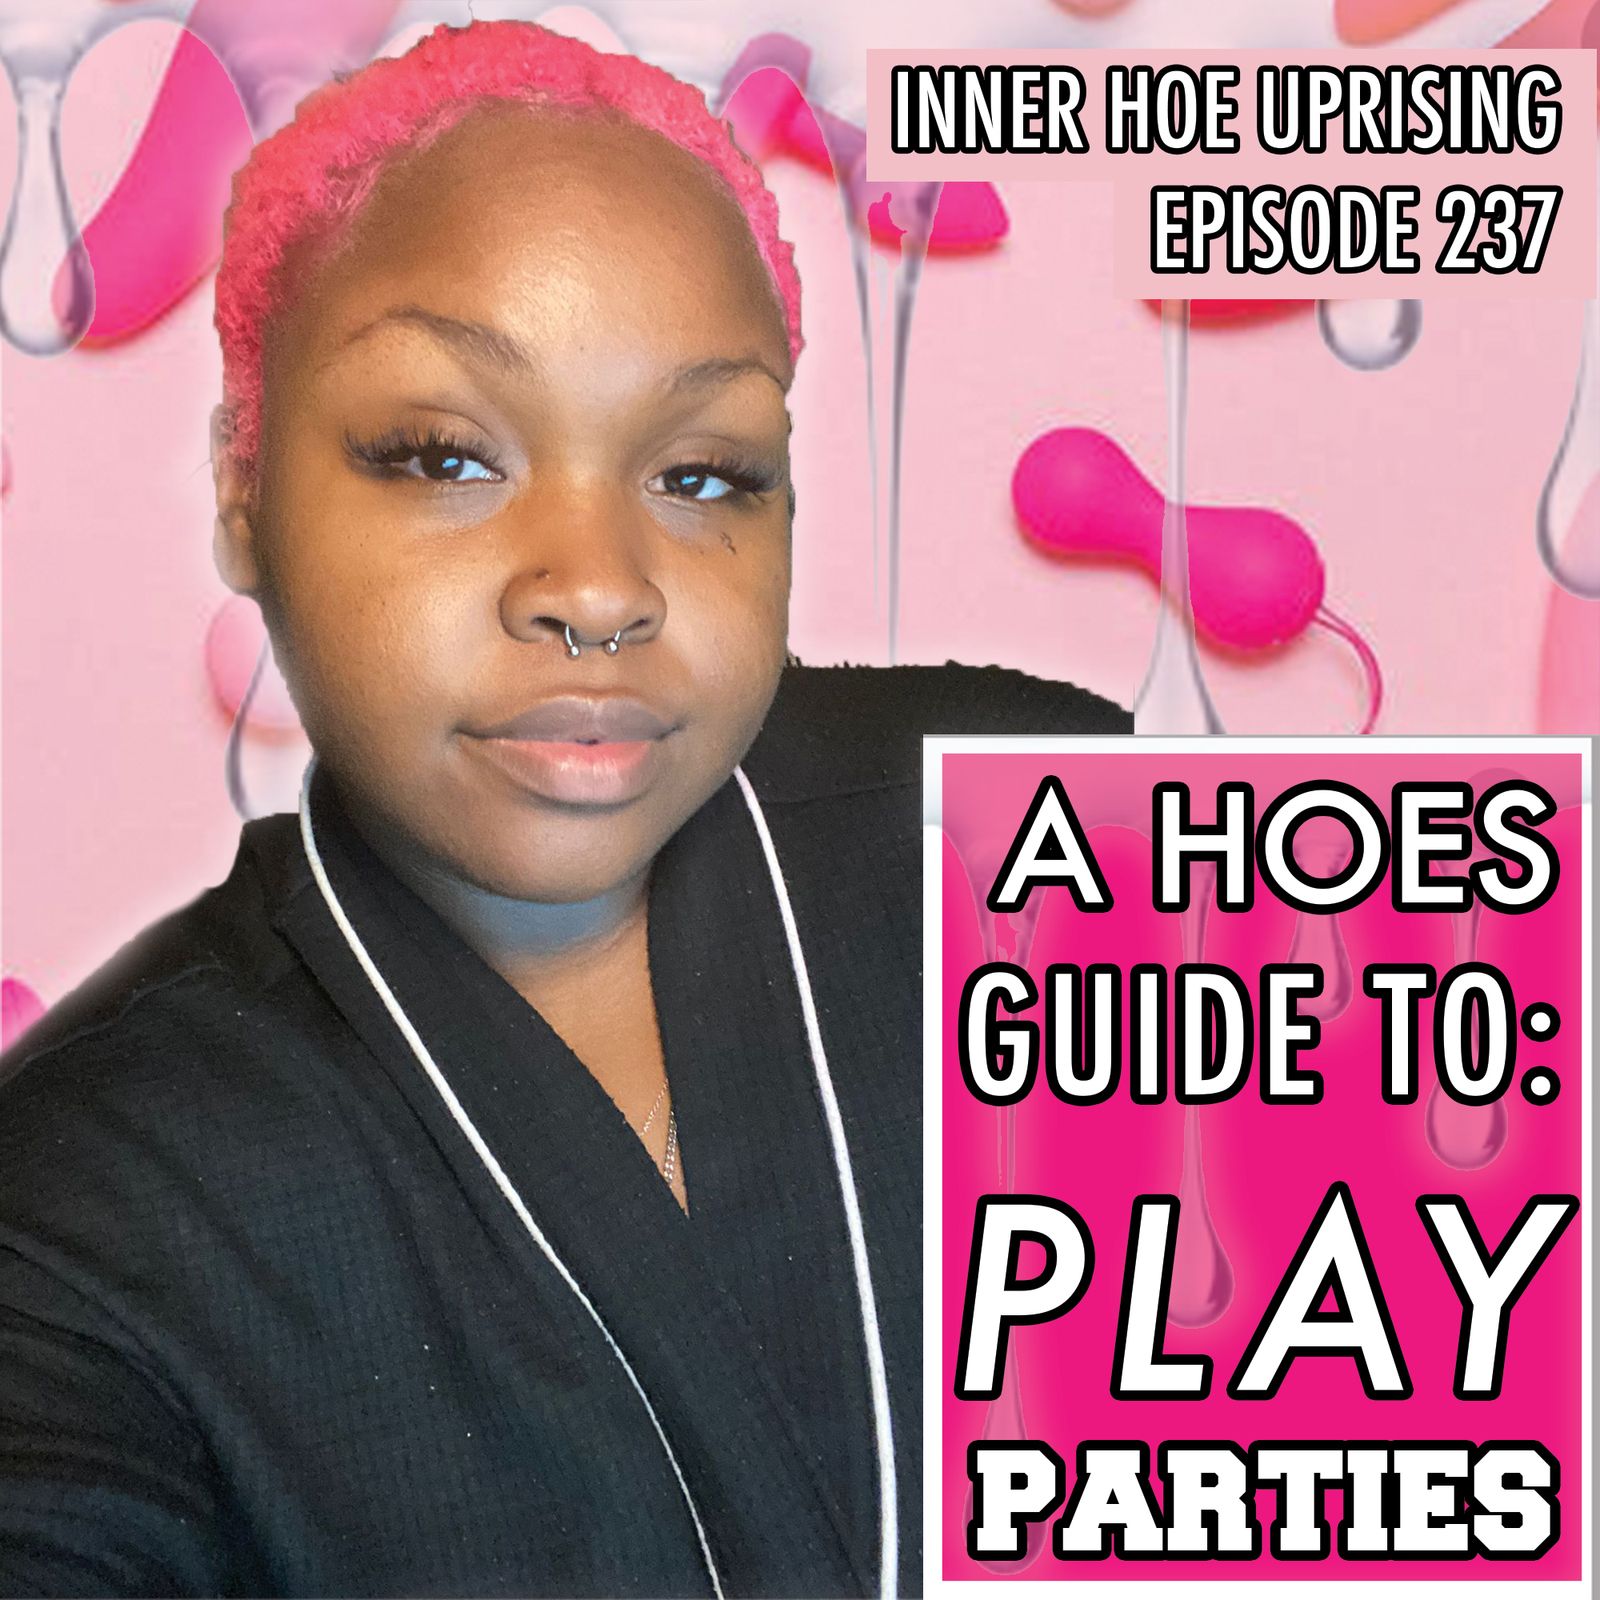 Thumbnail for "S7 Ep18: A H*es Guide to Play Parties".